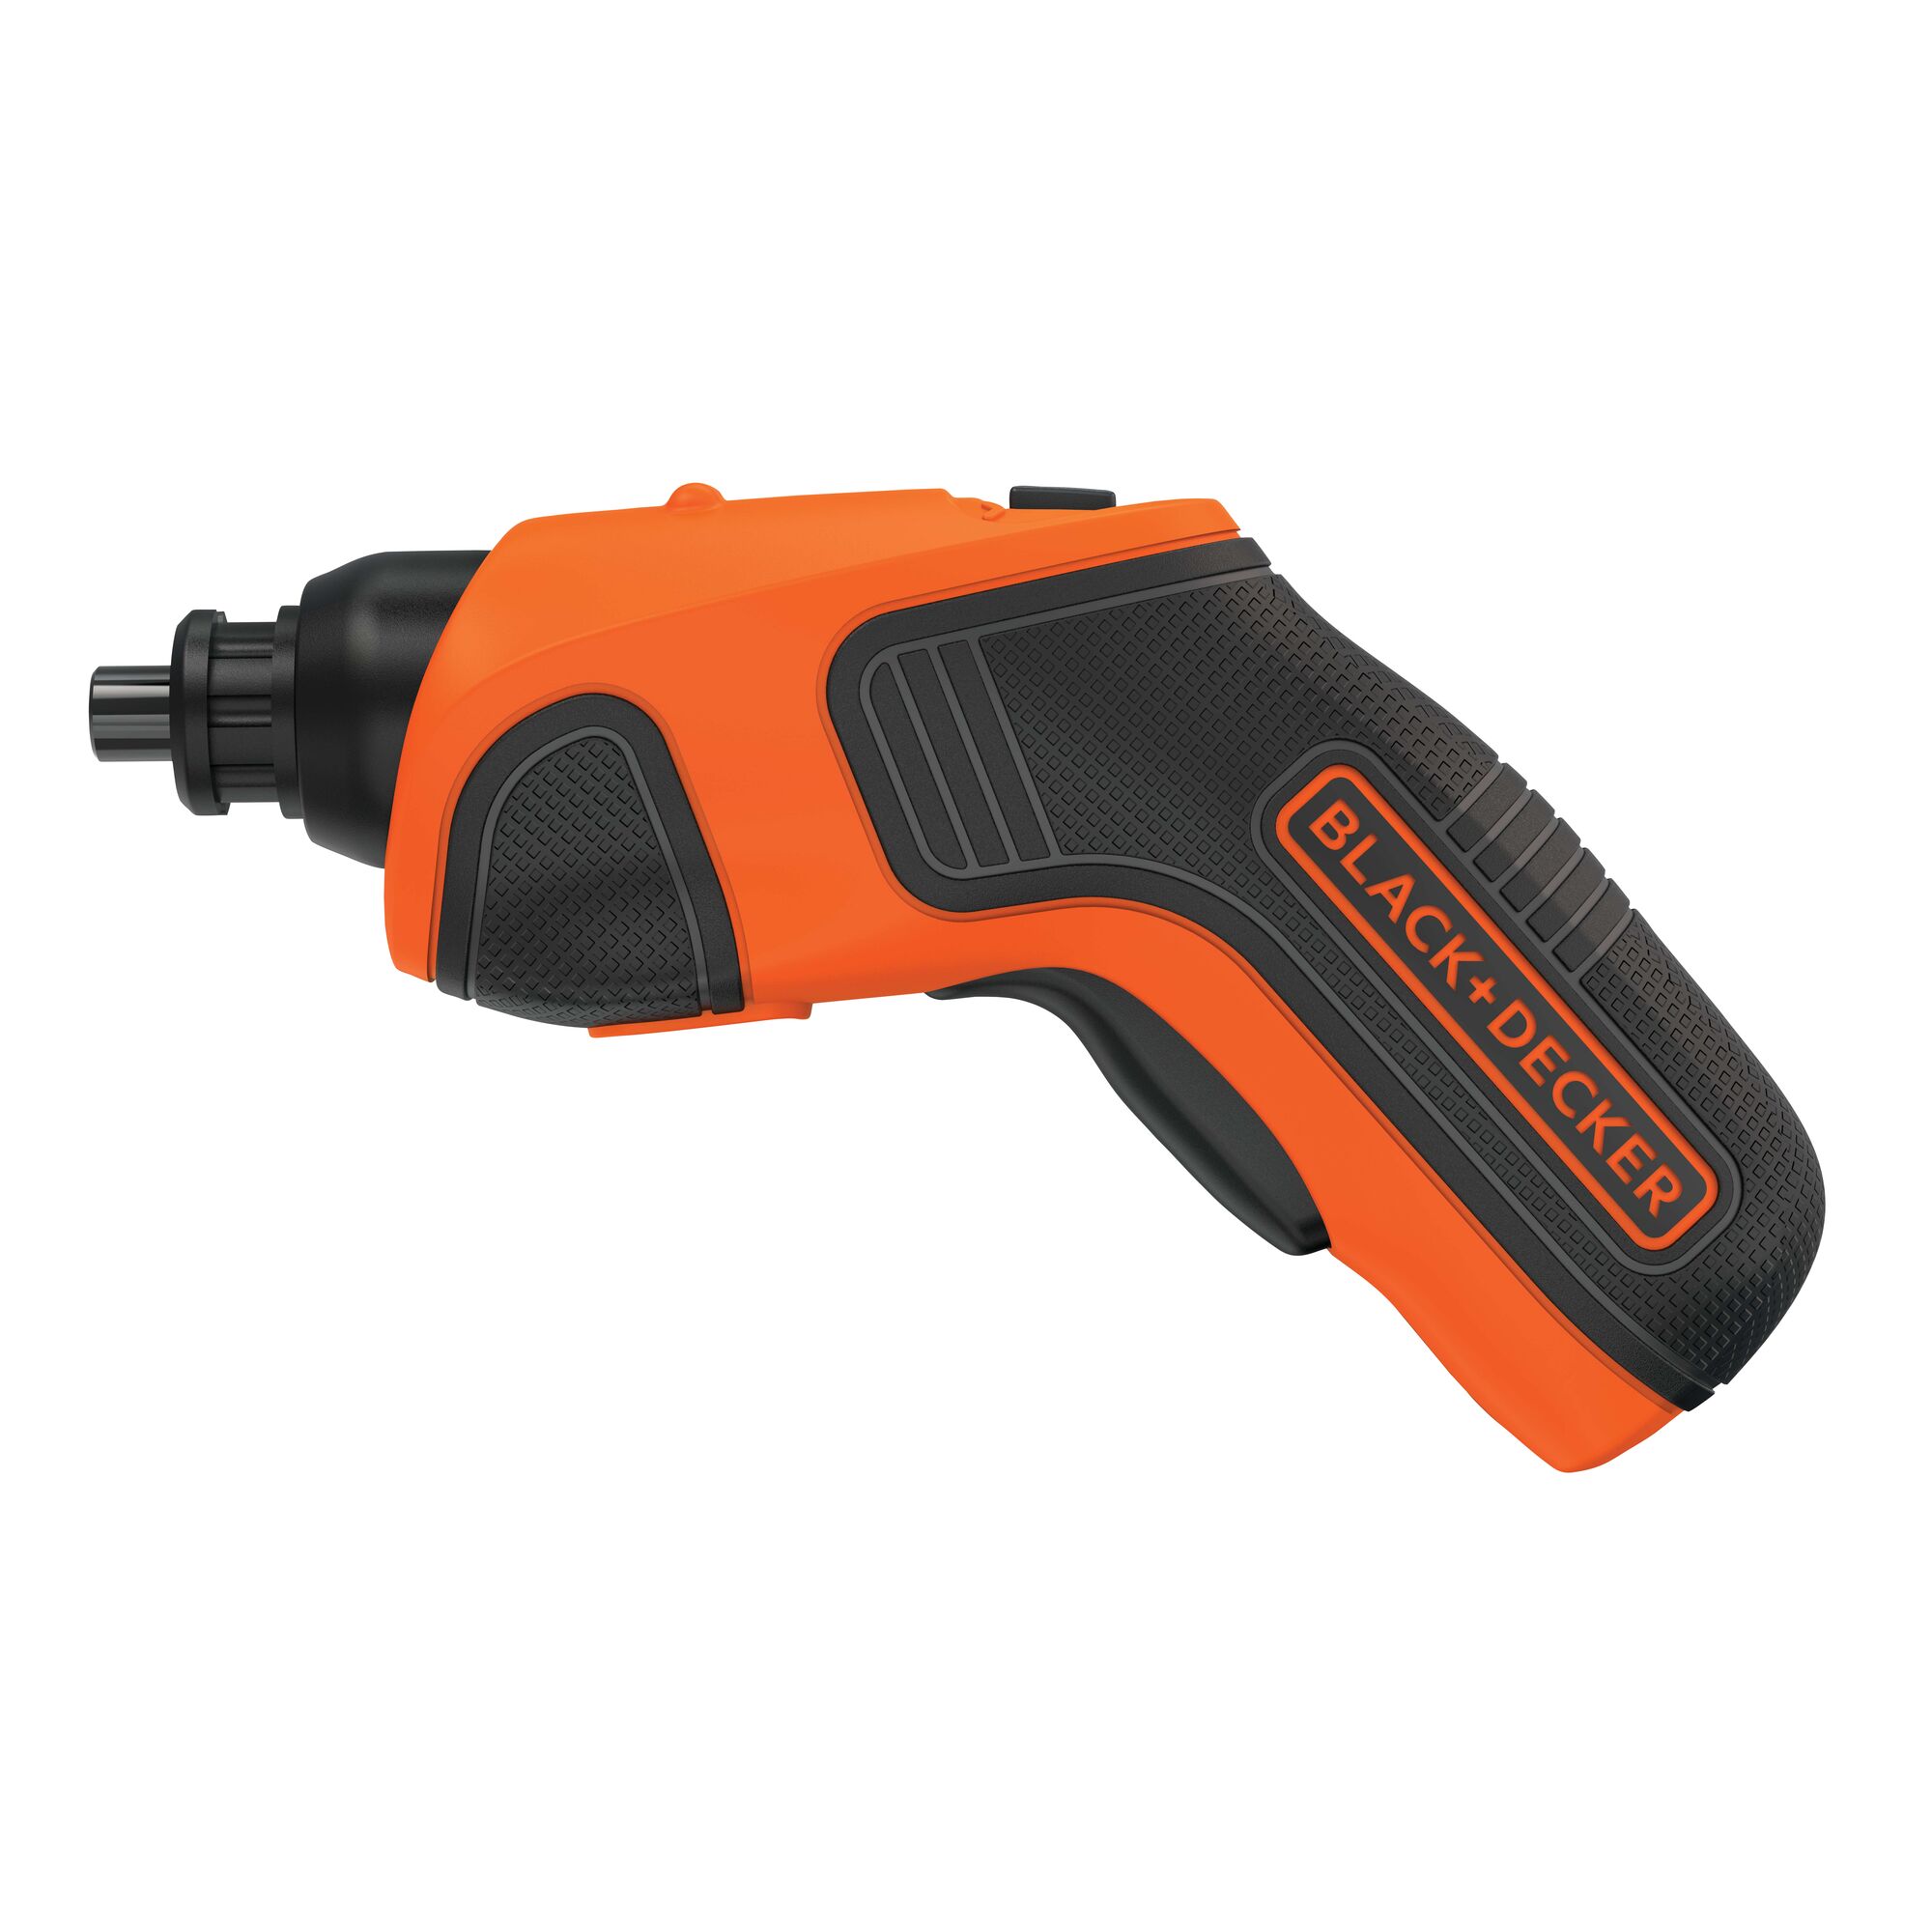 Lithium rechargeable screwdriver.